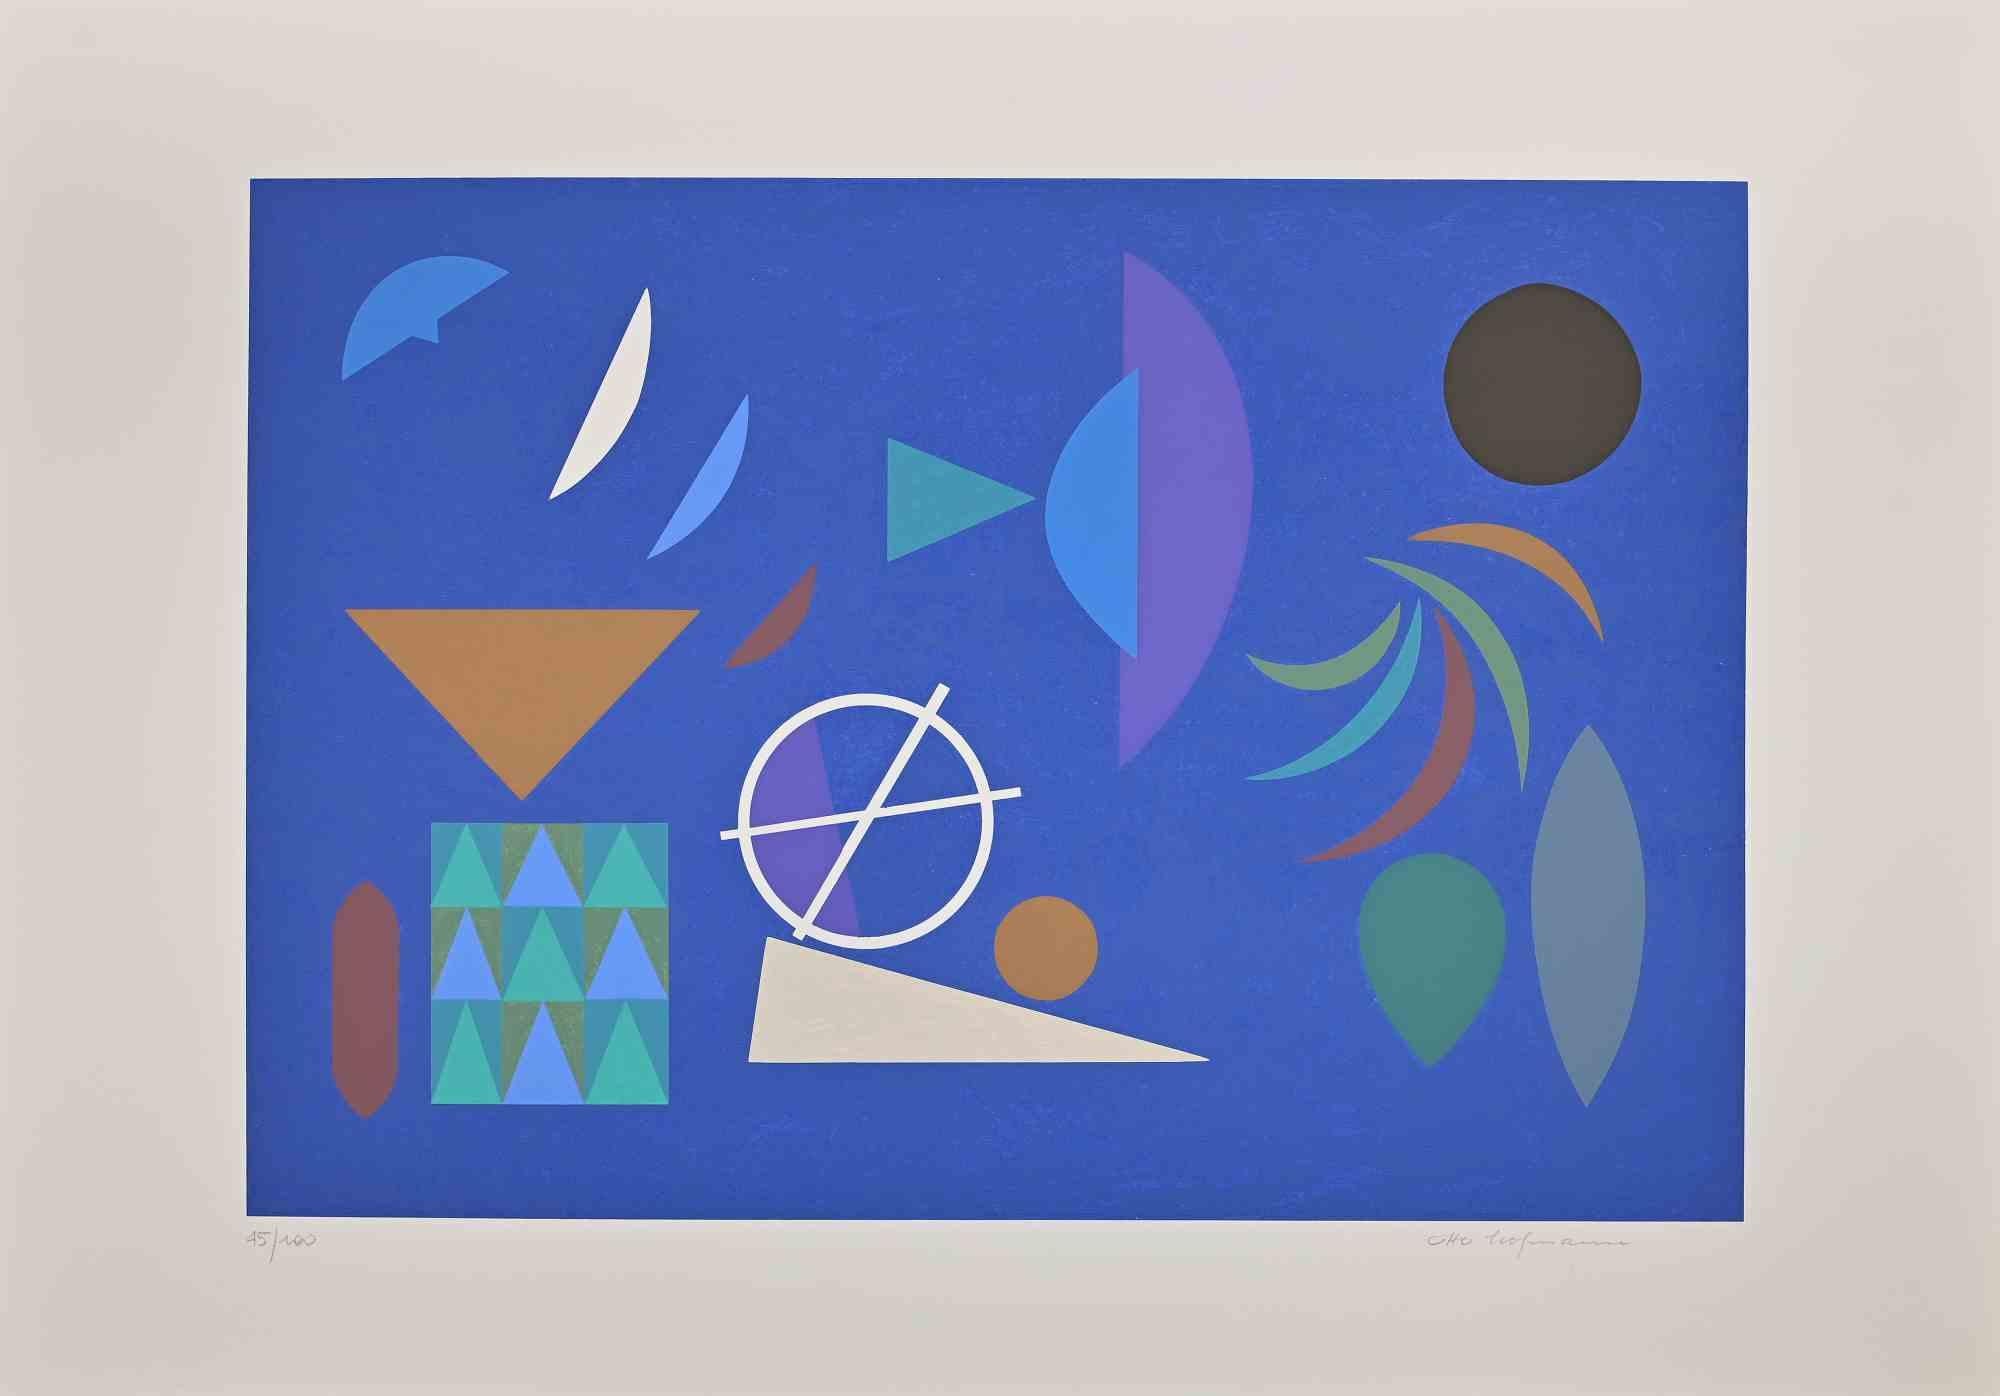 Blu composition is an original contemporary artwork realizedby Otto Hofmann in 1989.

Mixed colored screen print.

Hand signed on the lower right margin.

Numbered on the lower left. Edition of 45/100.

The artwork is from a potfolio edited by